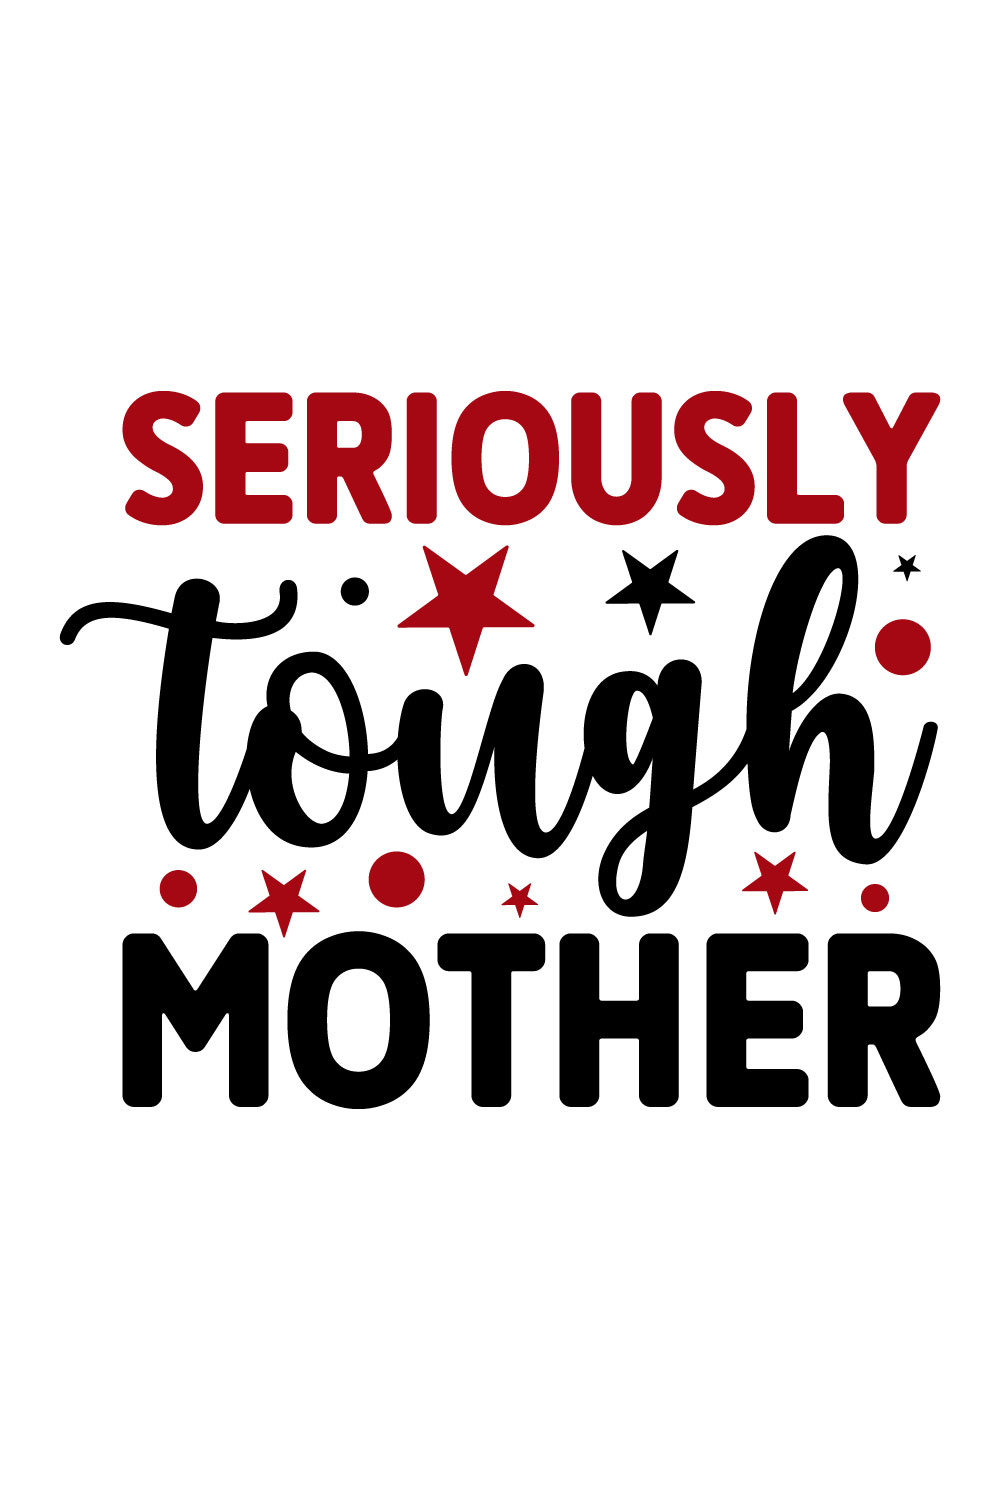 Image for prints with irresistible inscription Seriously Tough Mother